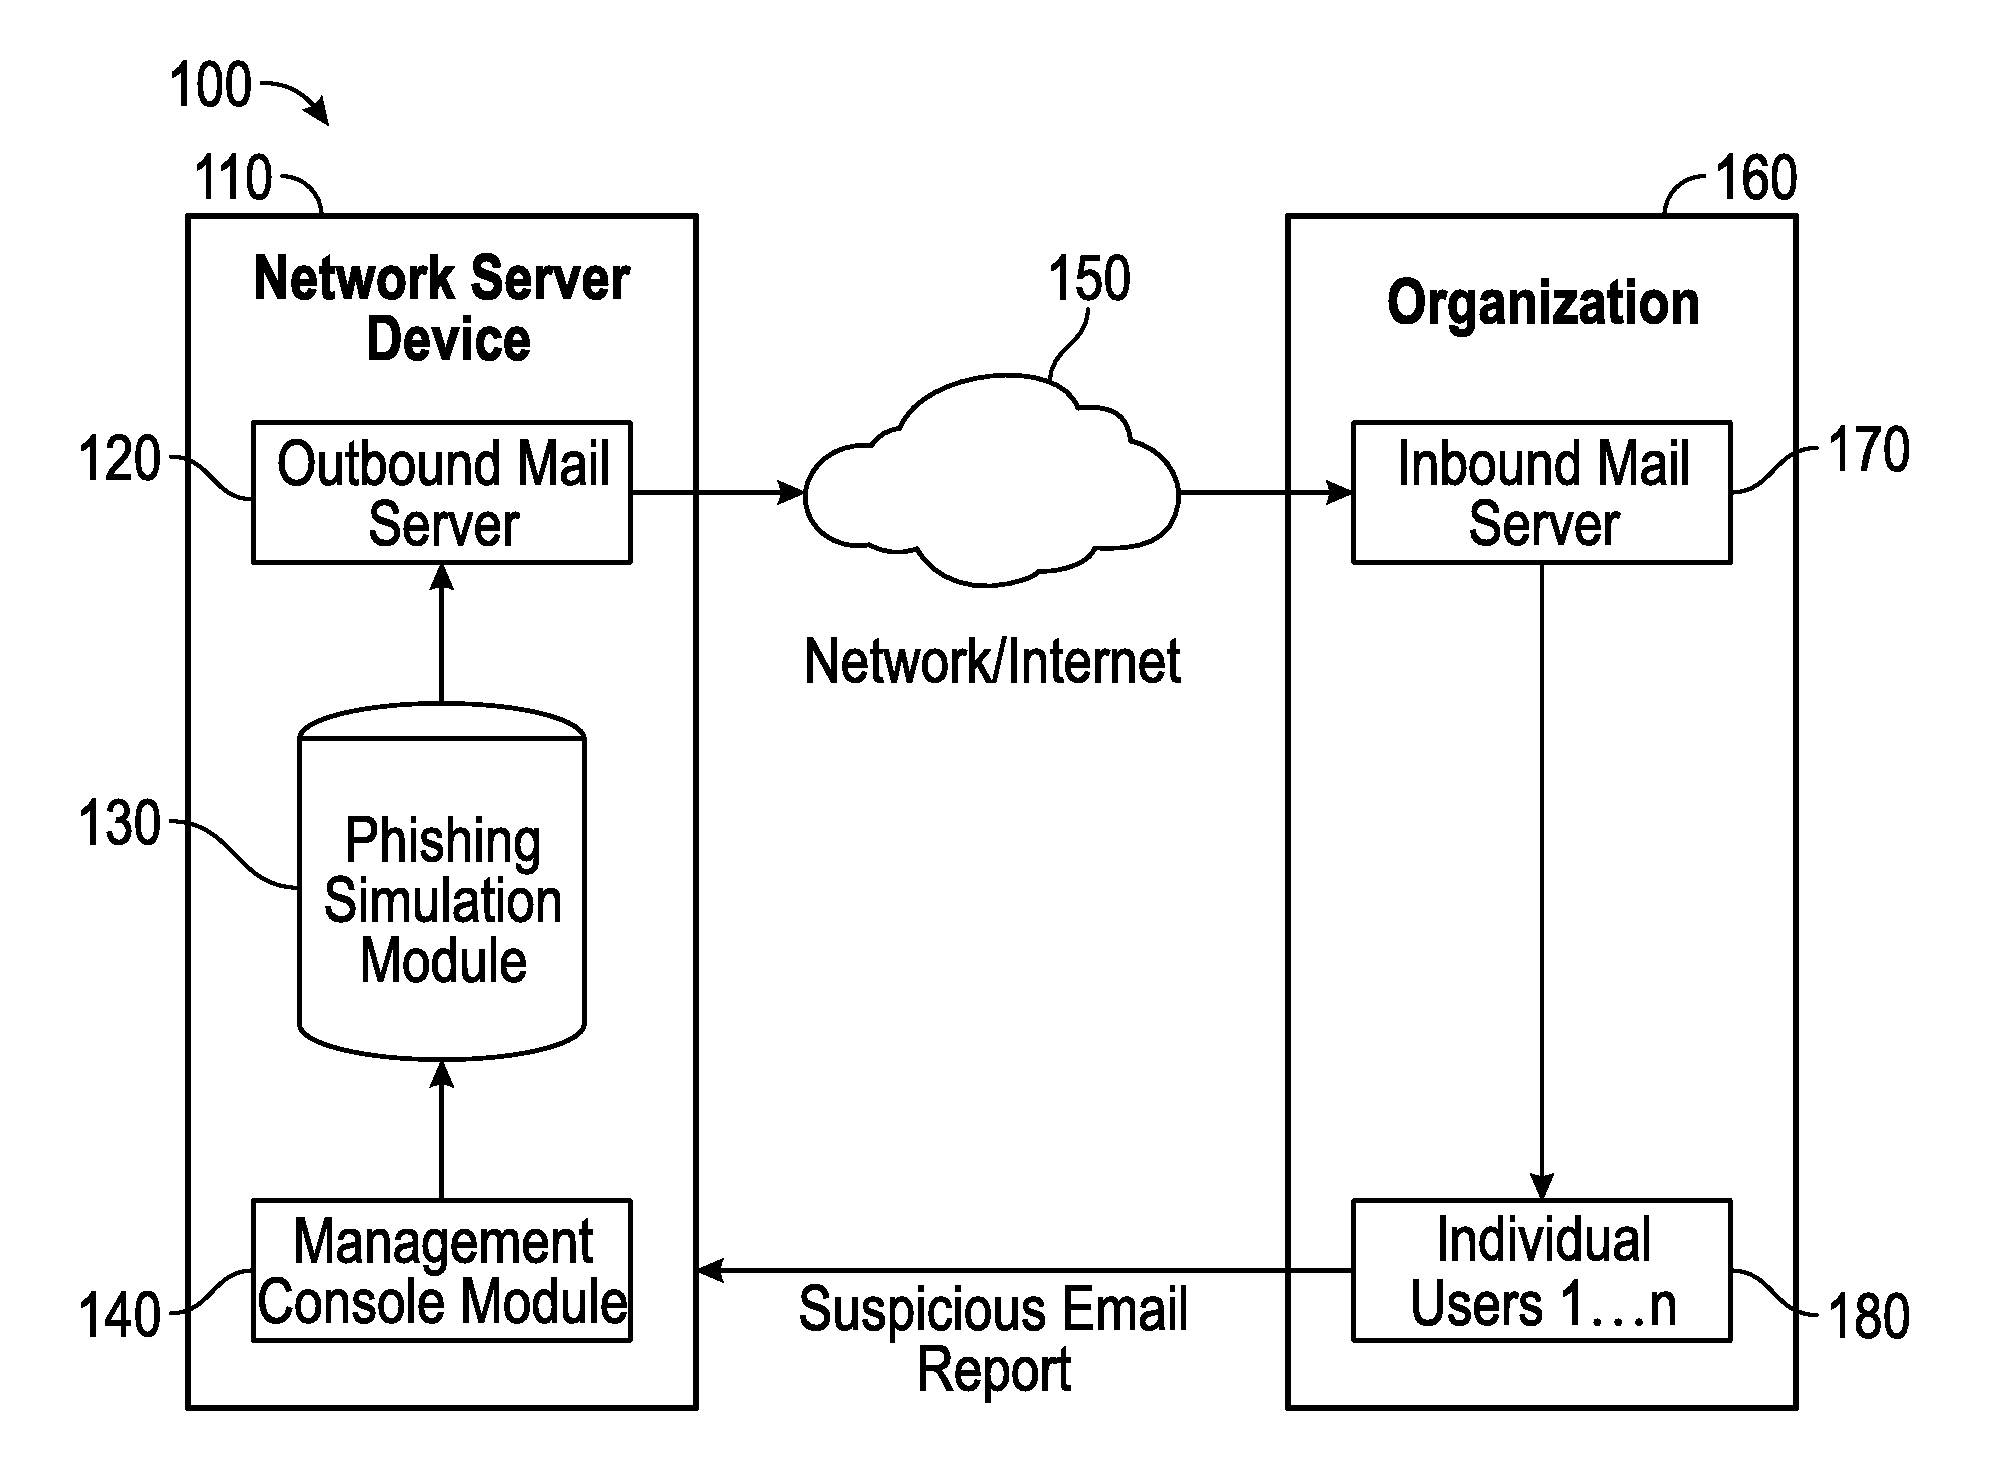 Suspicious message processing and incident response